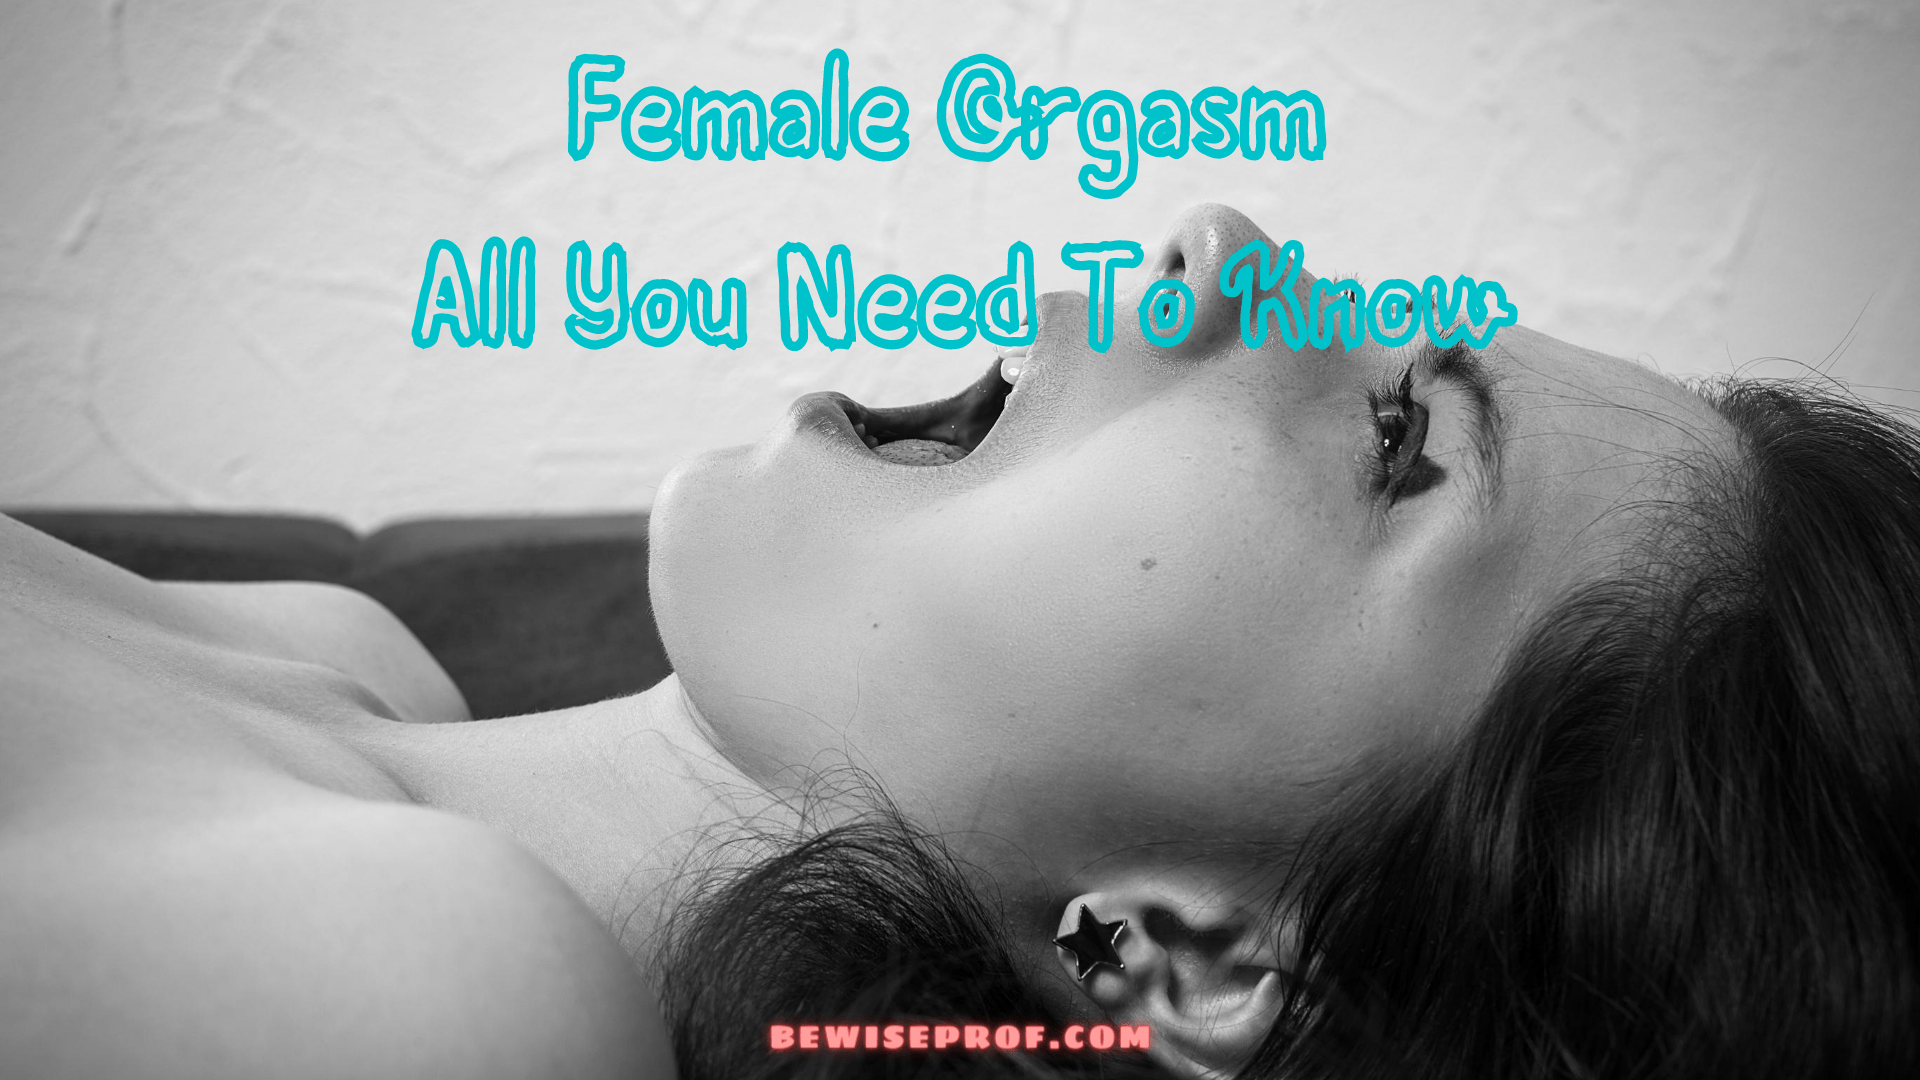 Female Orgasm: All You Need To Know